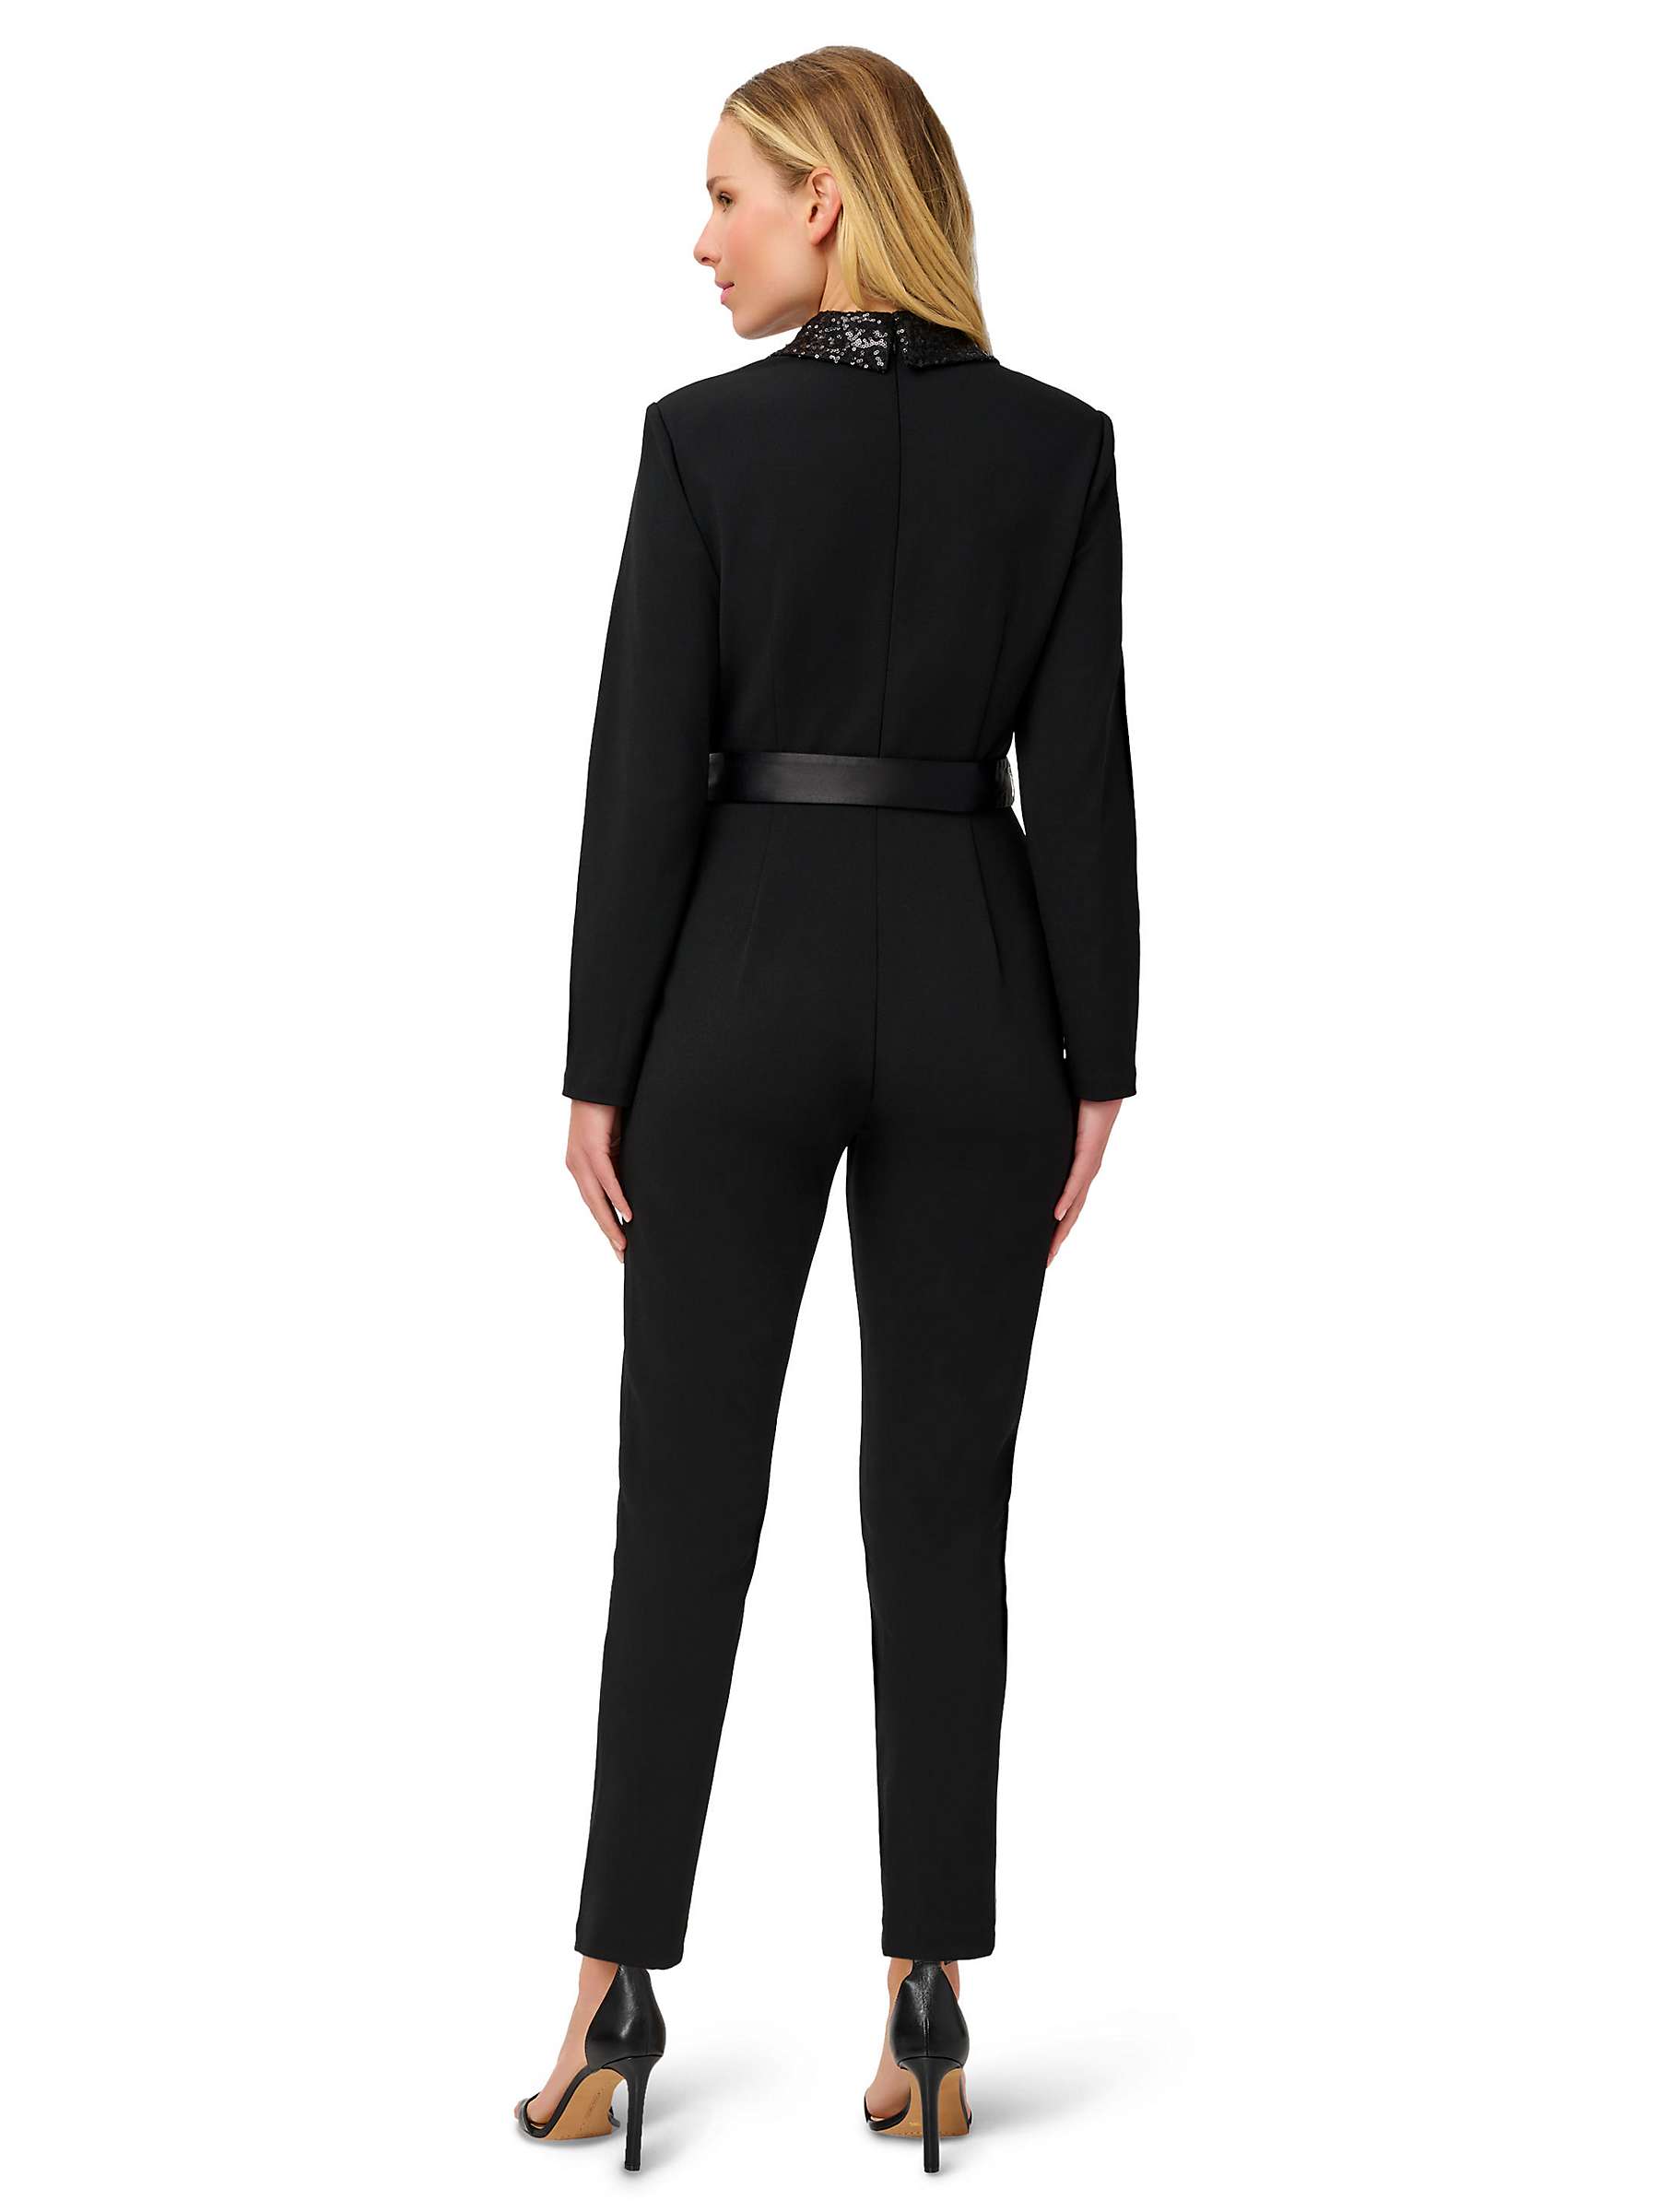 Buy Adrianna Papell Knit Crepe Tuxedo Jumpsuit, Black Online at johnlewis.com